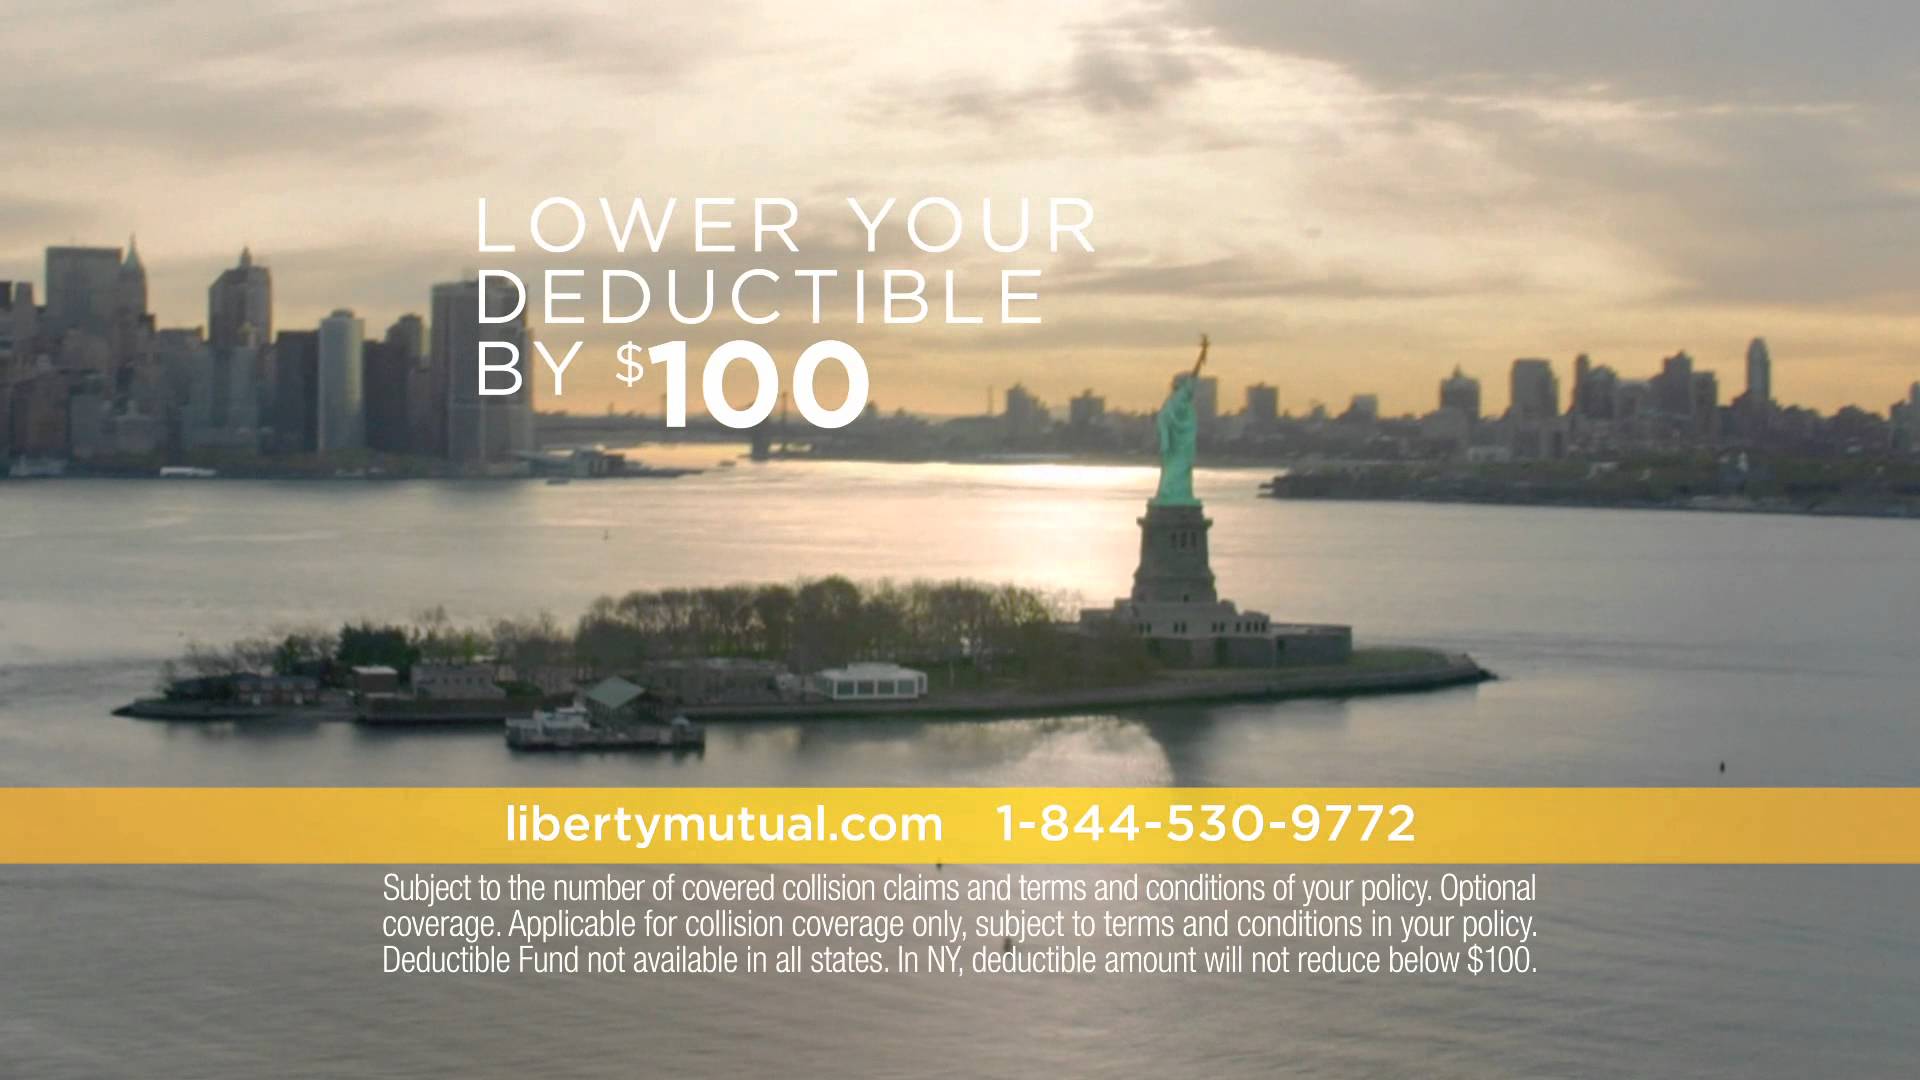 Liberty mutual commercial ispot tv